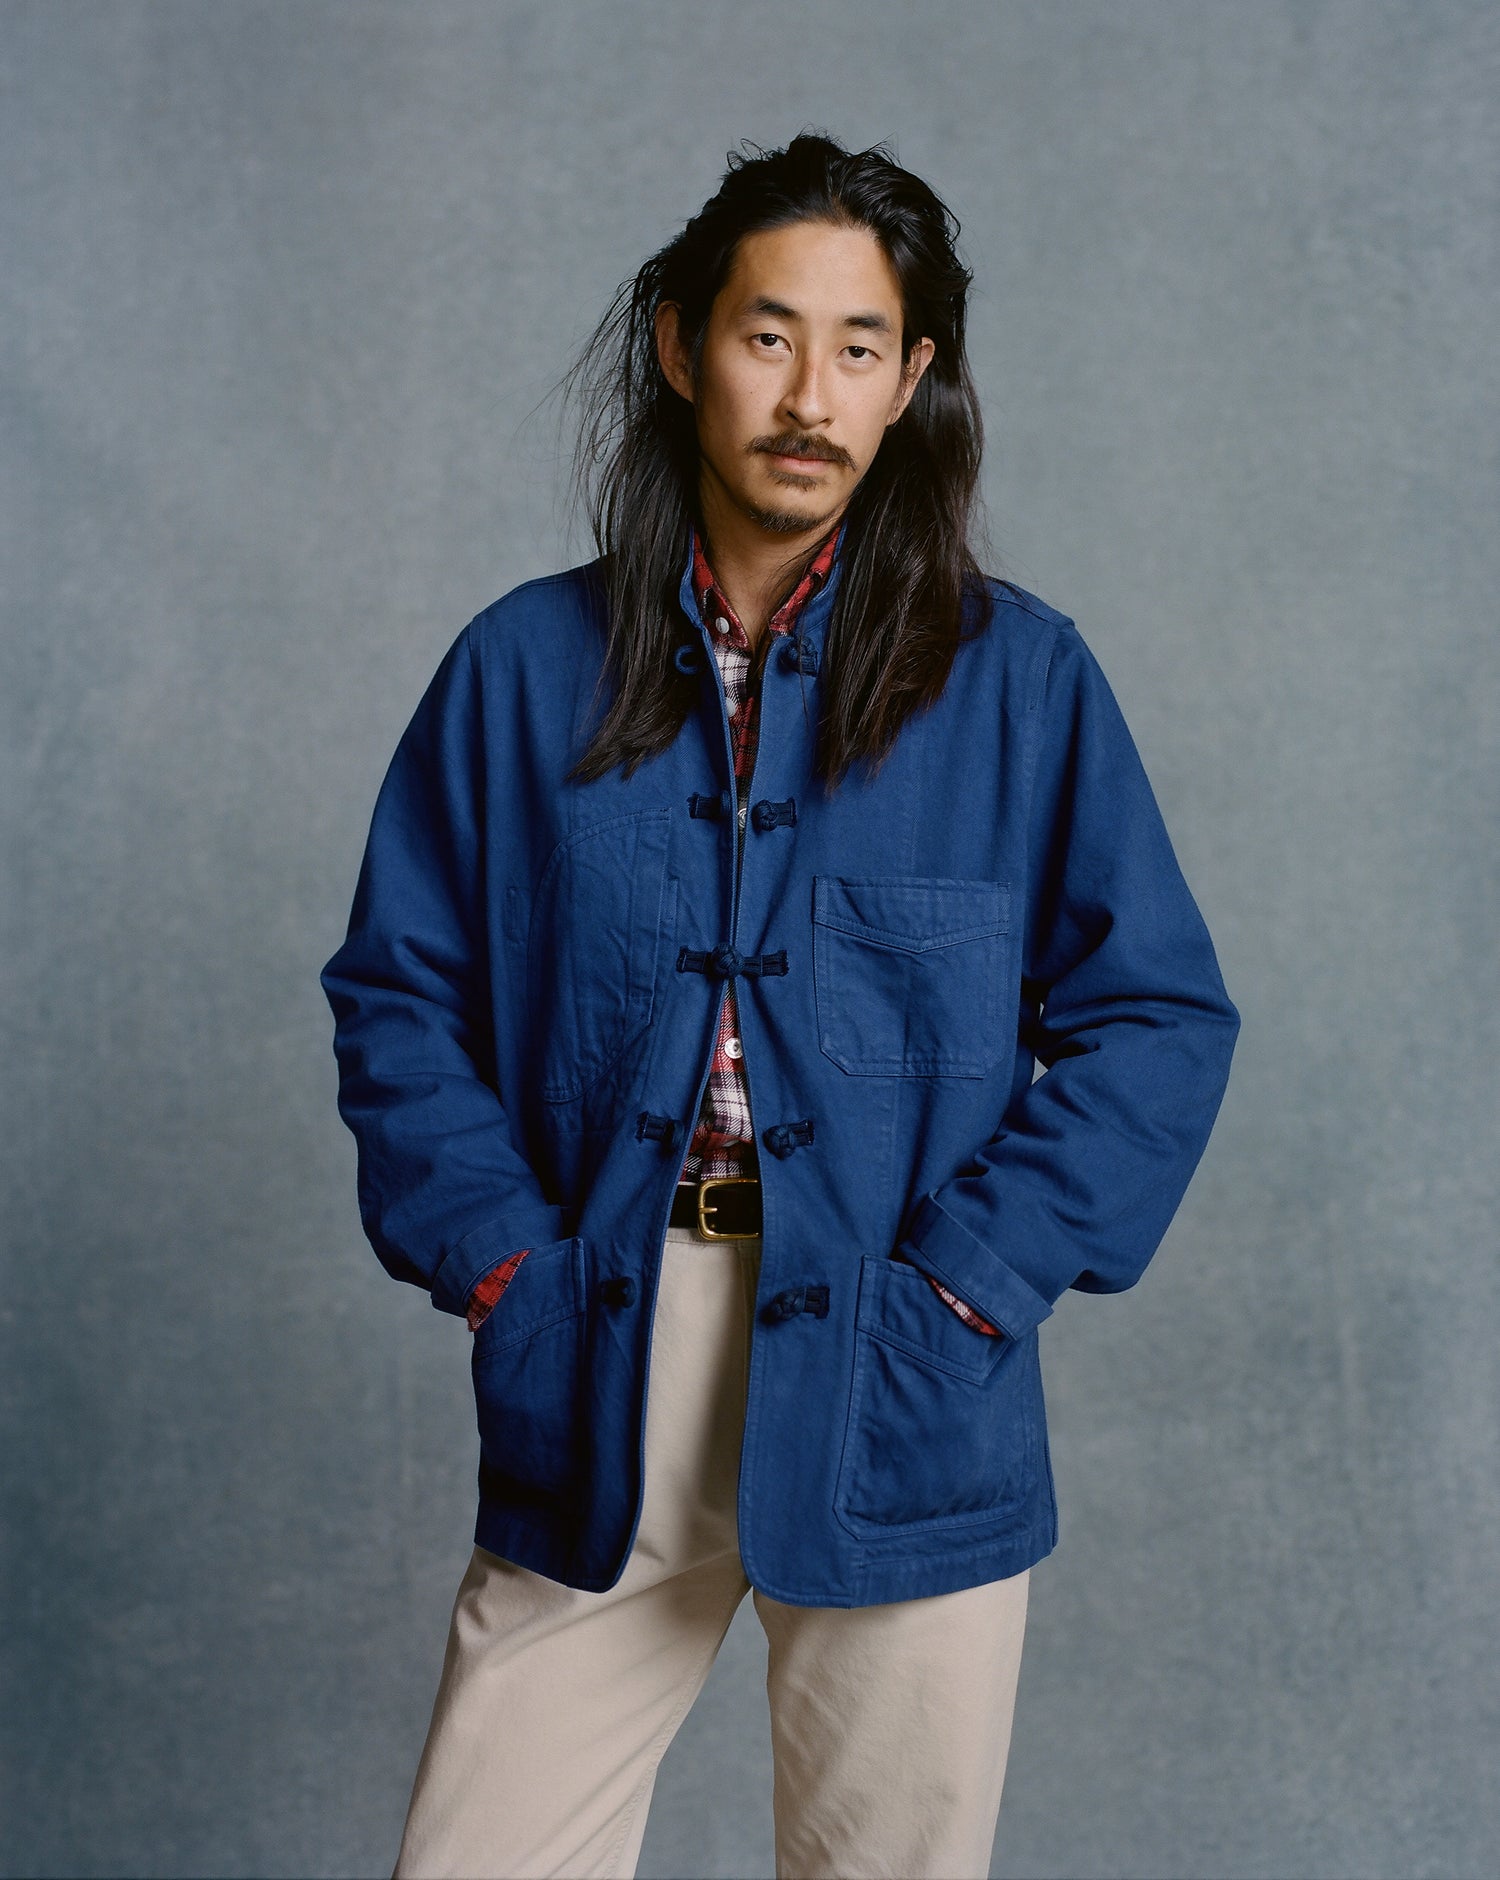 French Blue Cotton Twill Five-Pocket Artists Chore Jacket